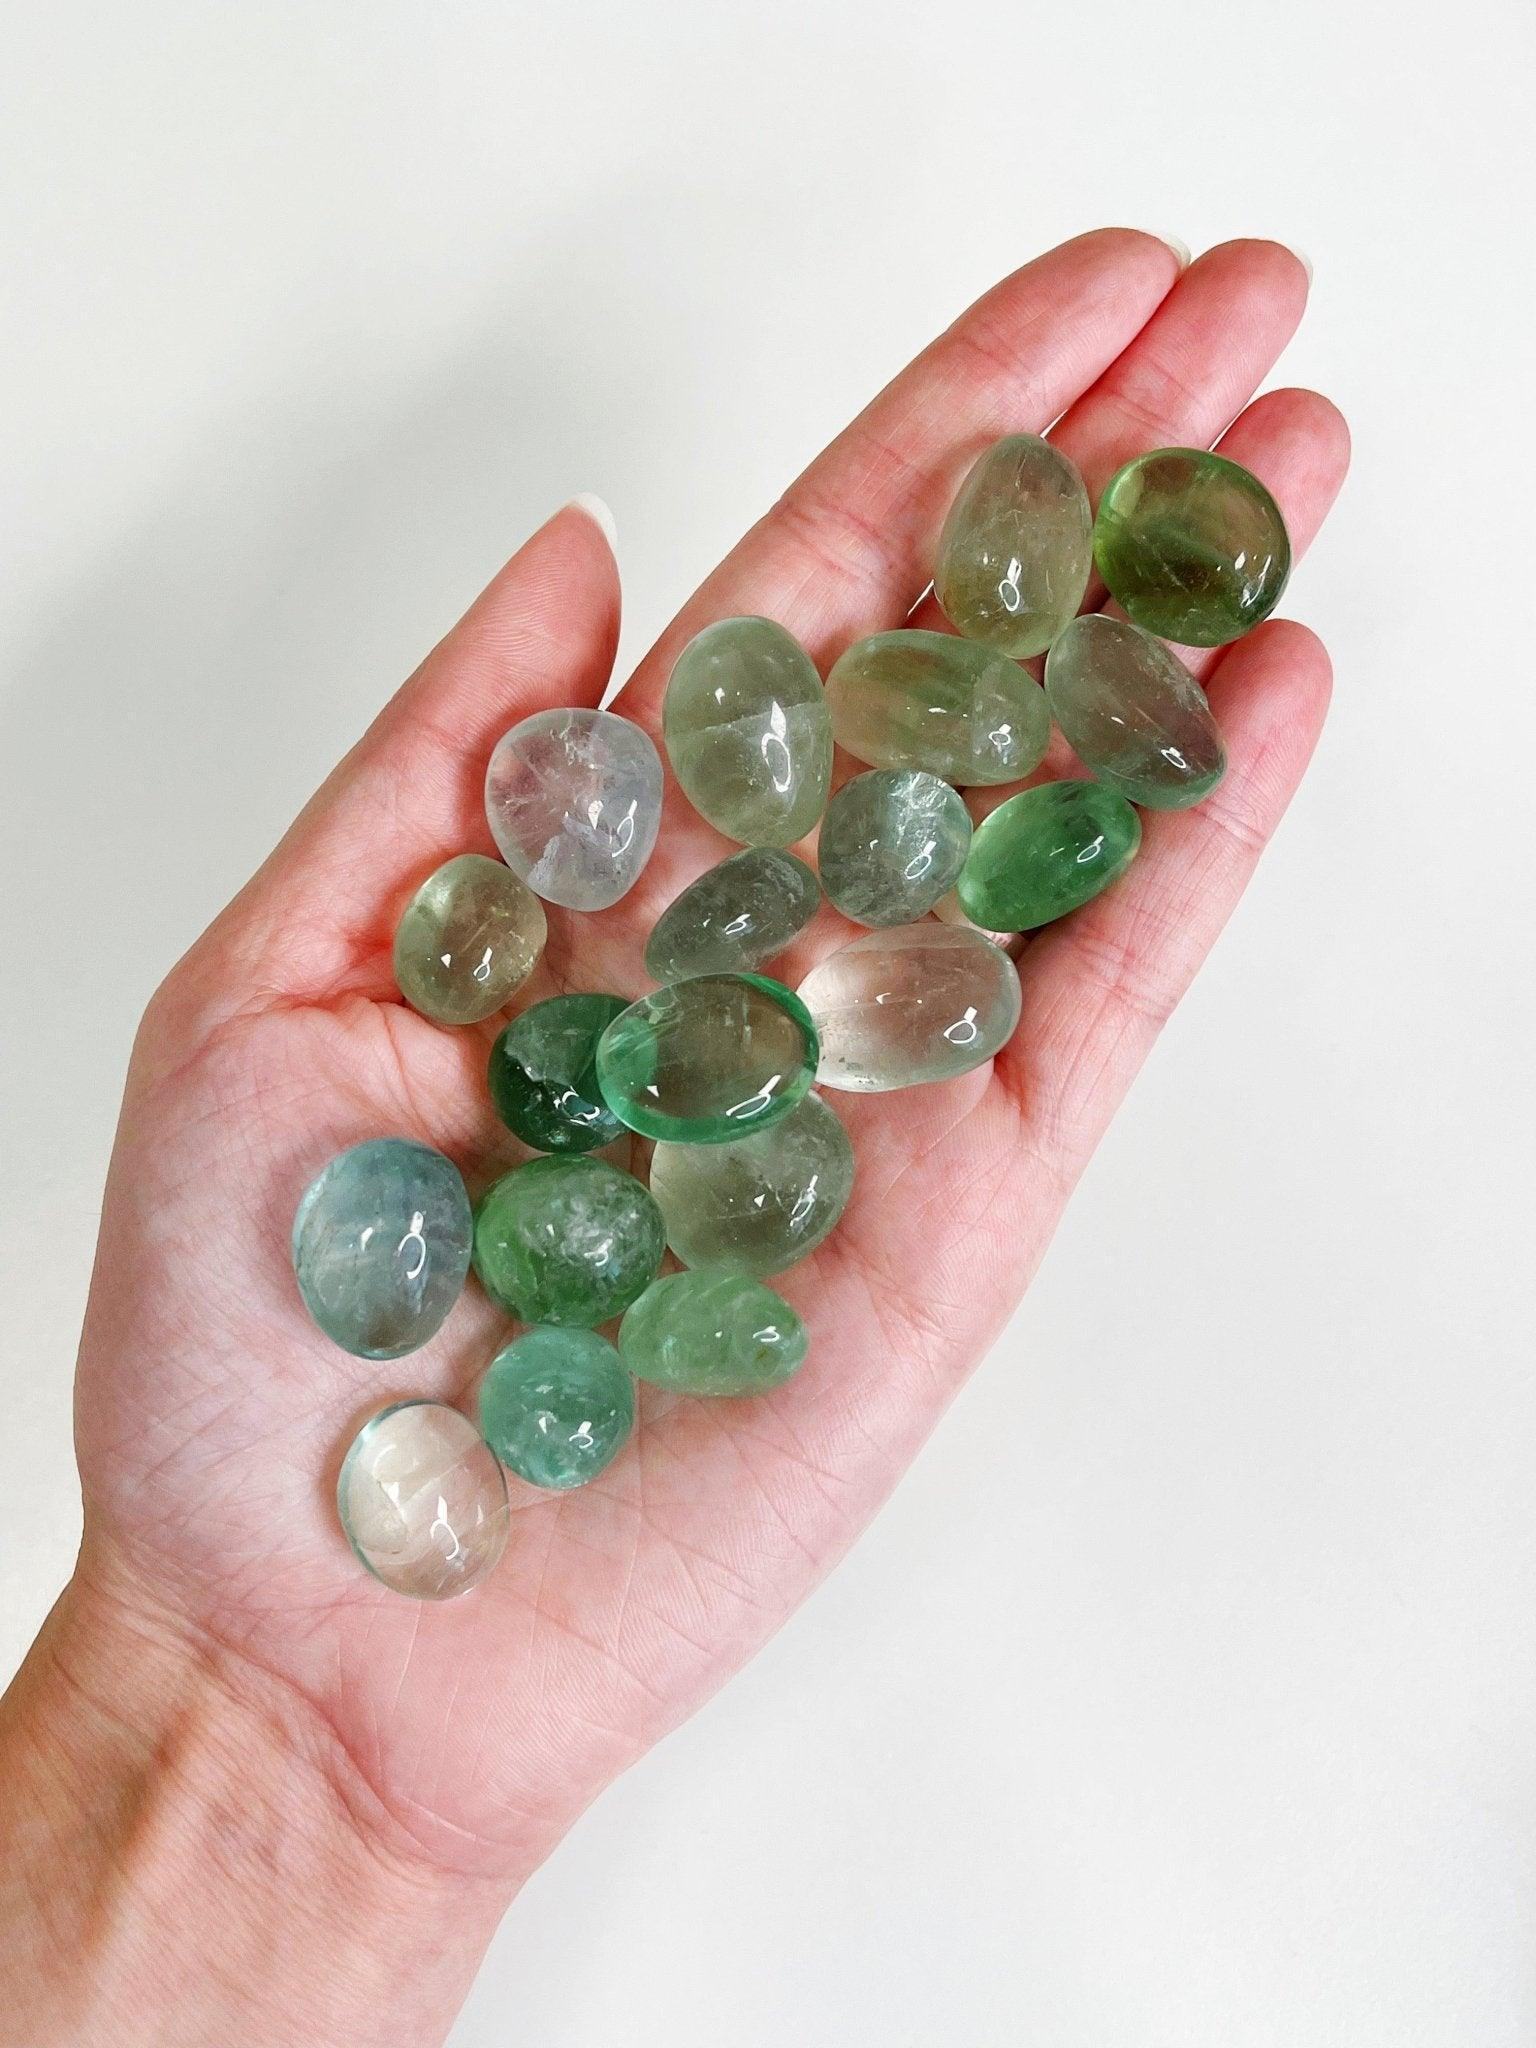 GREEN FLUORITE TUMBLE - 33 bday, 444 sale, bulk, end of year sale, fluorite, focus gift bundle, green fluorite, holiday sale, new year sale, pocket crystal, pocket stone, tumble, update - The Mineral Maven